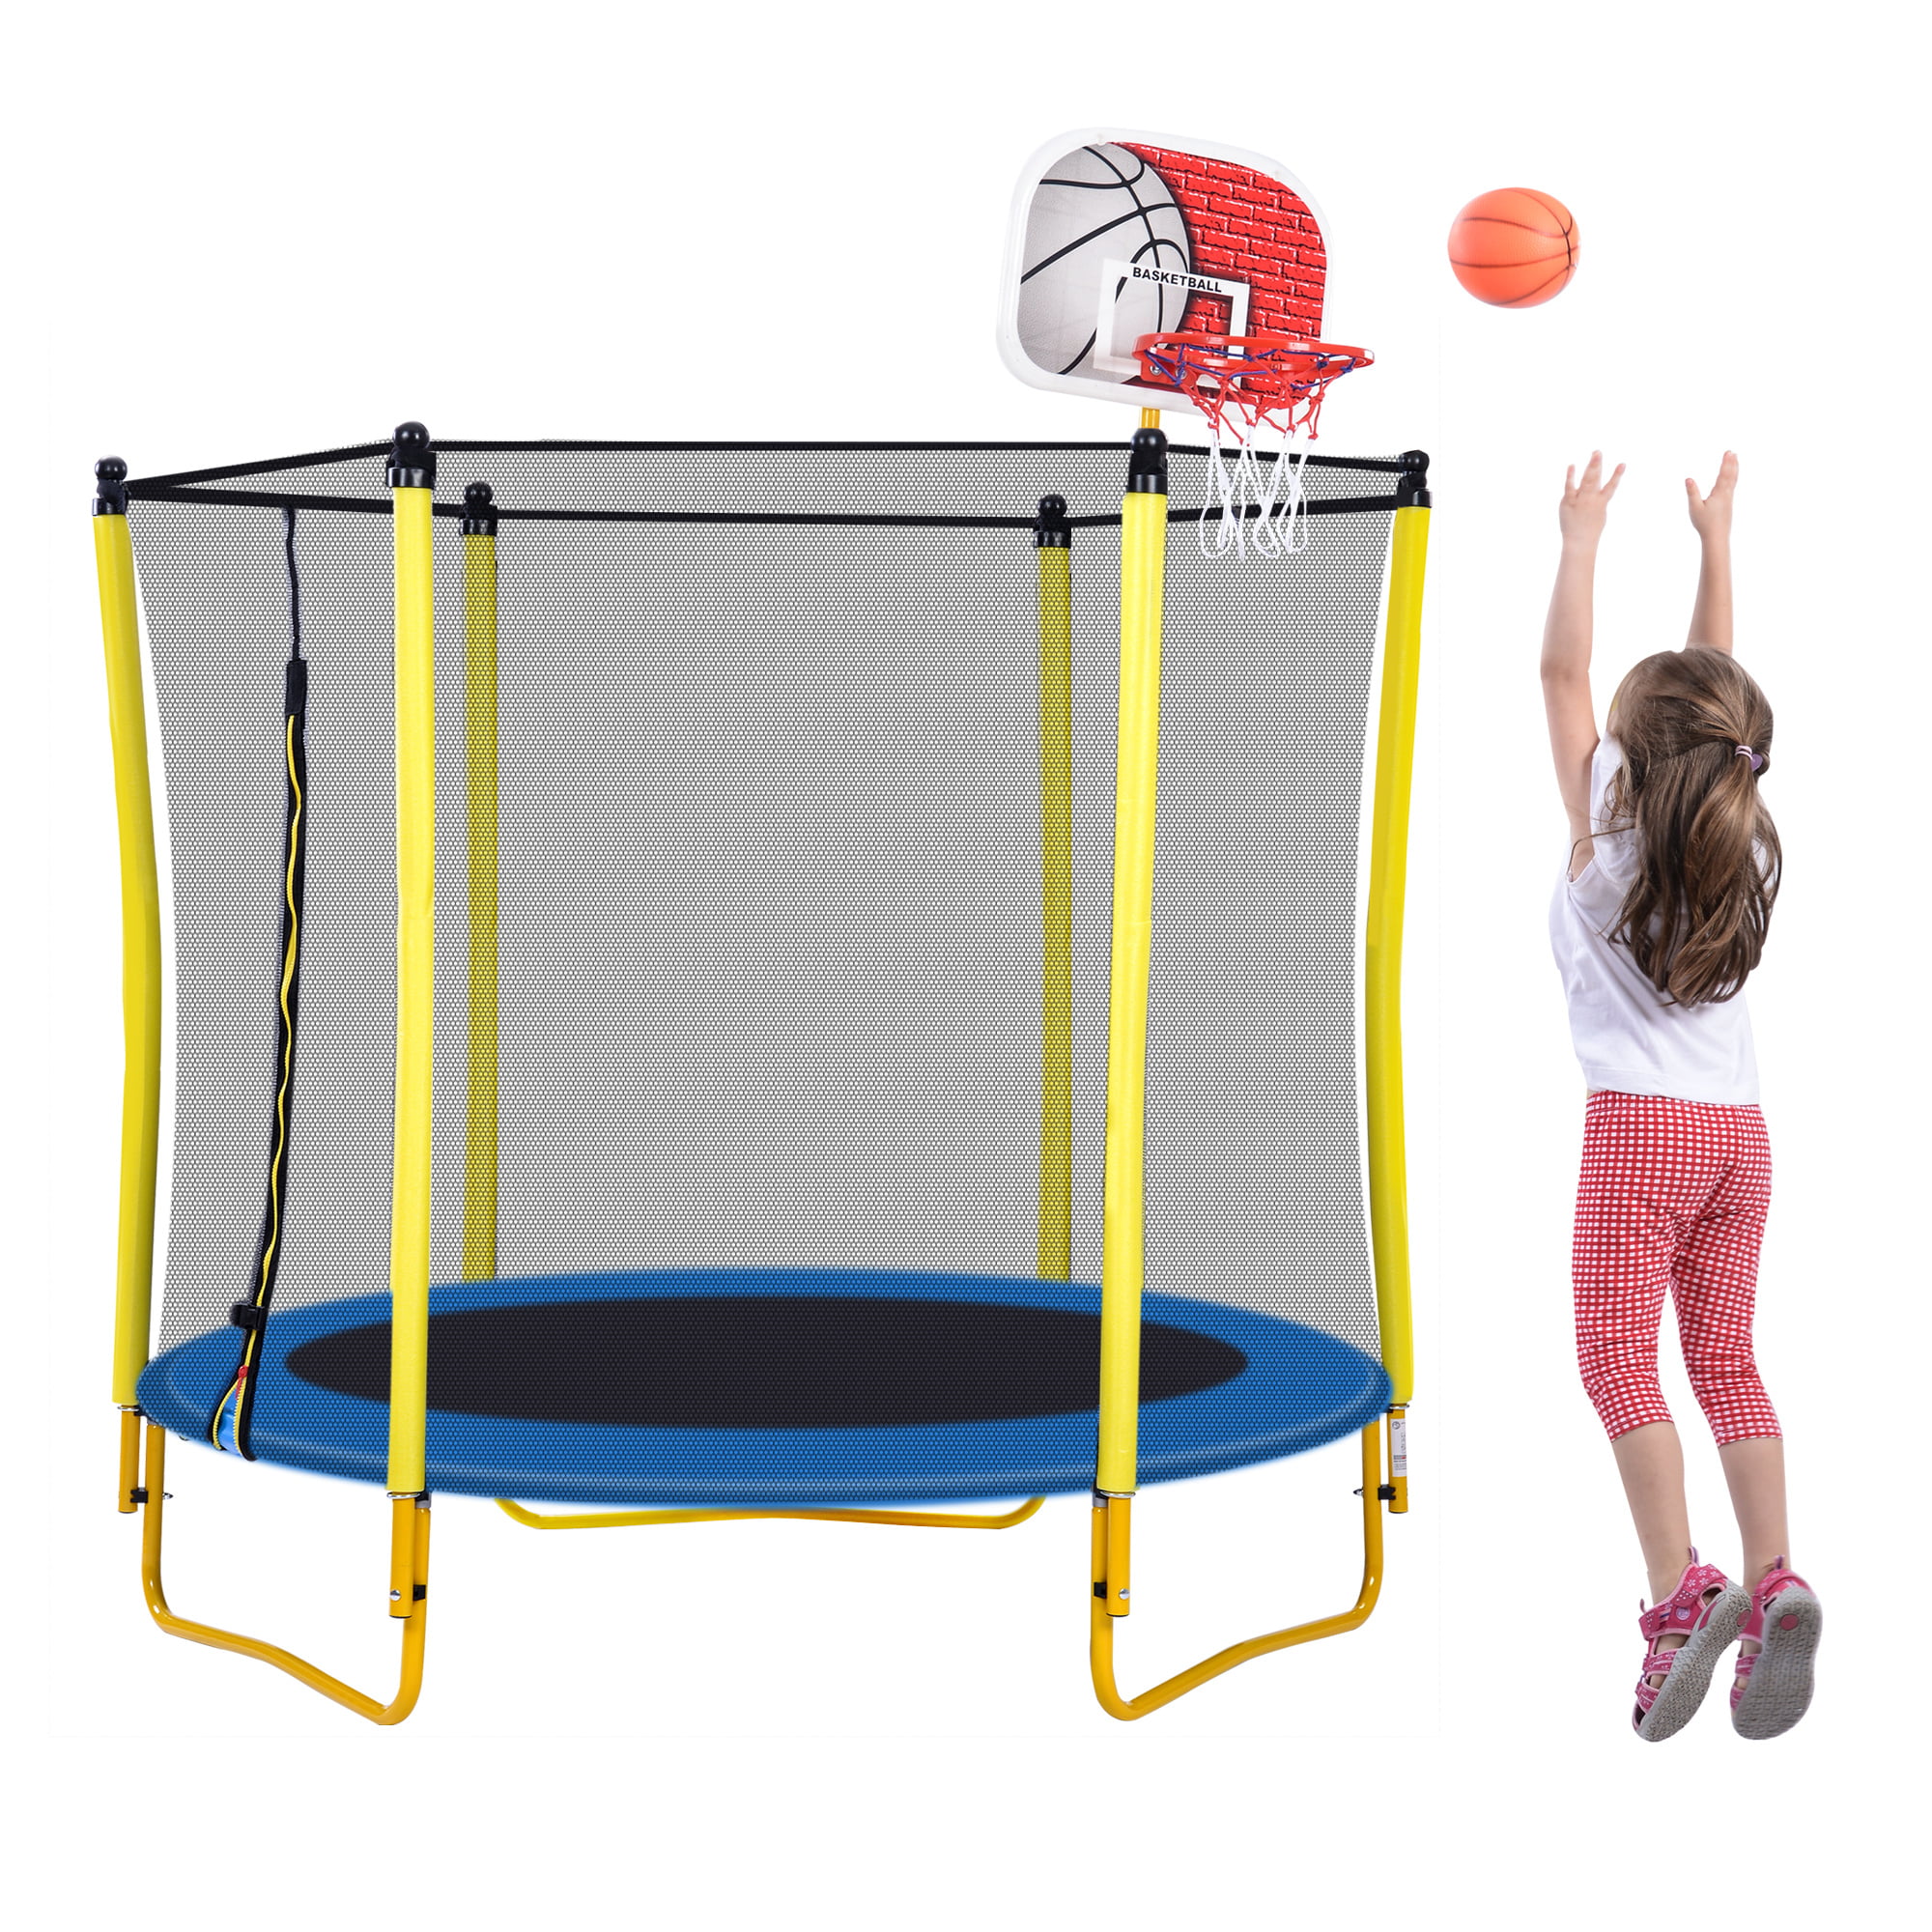 Details about   Kids Mini Trampoline with Safety Enclosure Net and Spring Pad Outdoor Indoor 5FT 